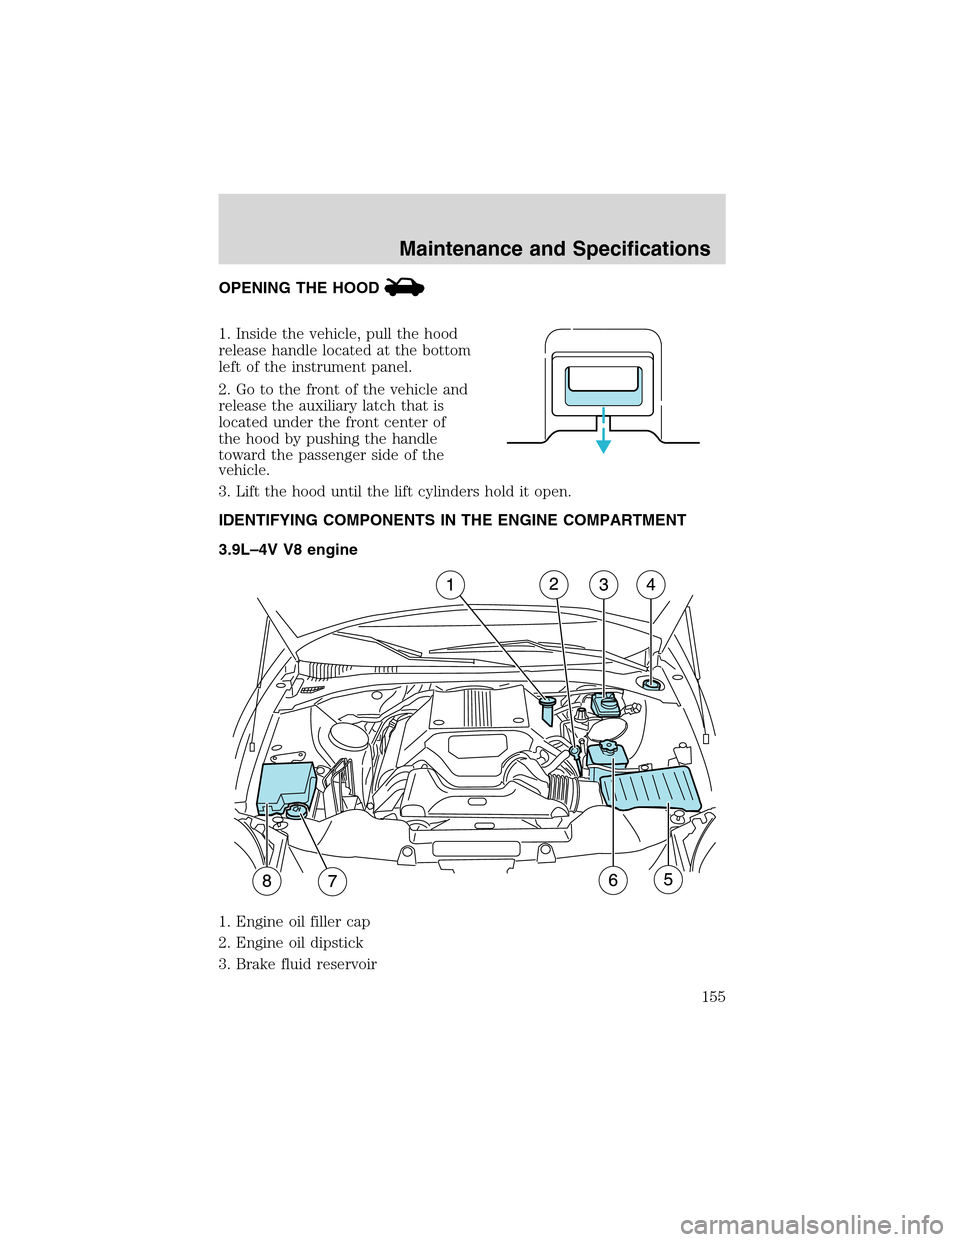 FORD THUNDERBIRD 2003 11.G Owners Manual OPENING THE HOOD
1. Inside the vehicle, pull the hood
release handle located at the bottom
left of the instrument panel.
2. Go to the front of the vehicle and
release the auxiliary latch that is
locat